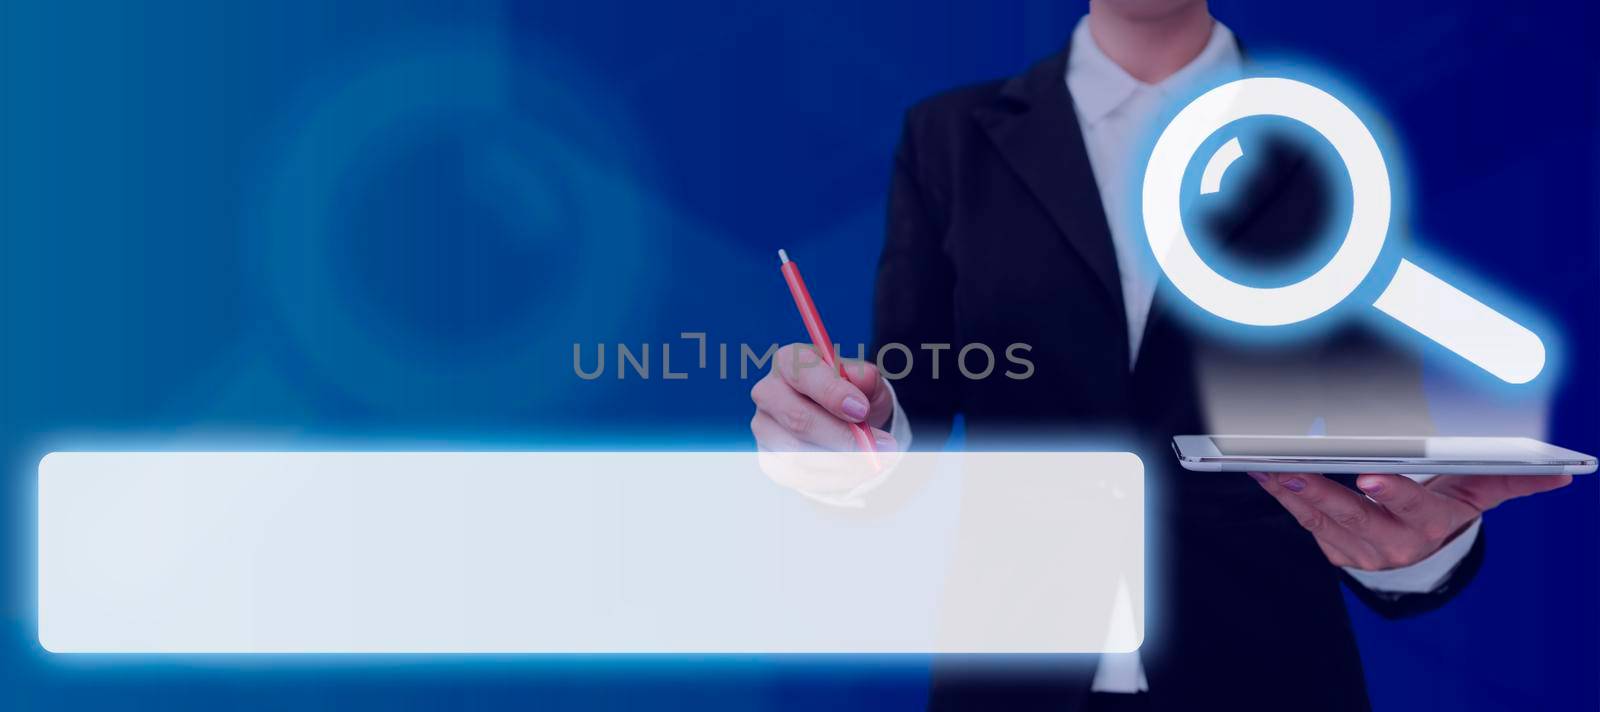 Businesswoman With Tablet And Pen Pointing On Search Bar Looking For Information An Abstract Design. Woman Holding Pad Containing Crucial Data And Messages. by nialowwa